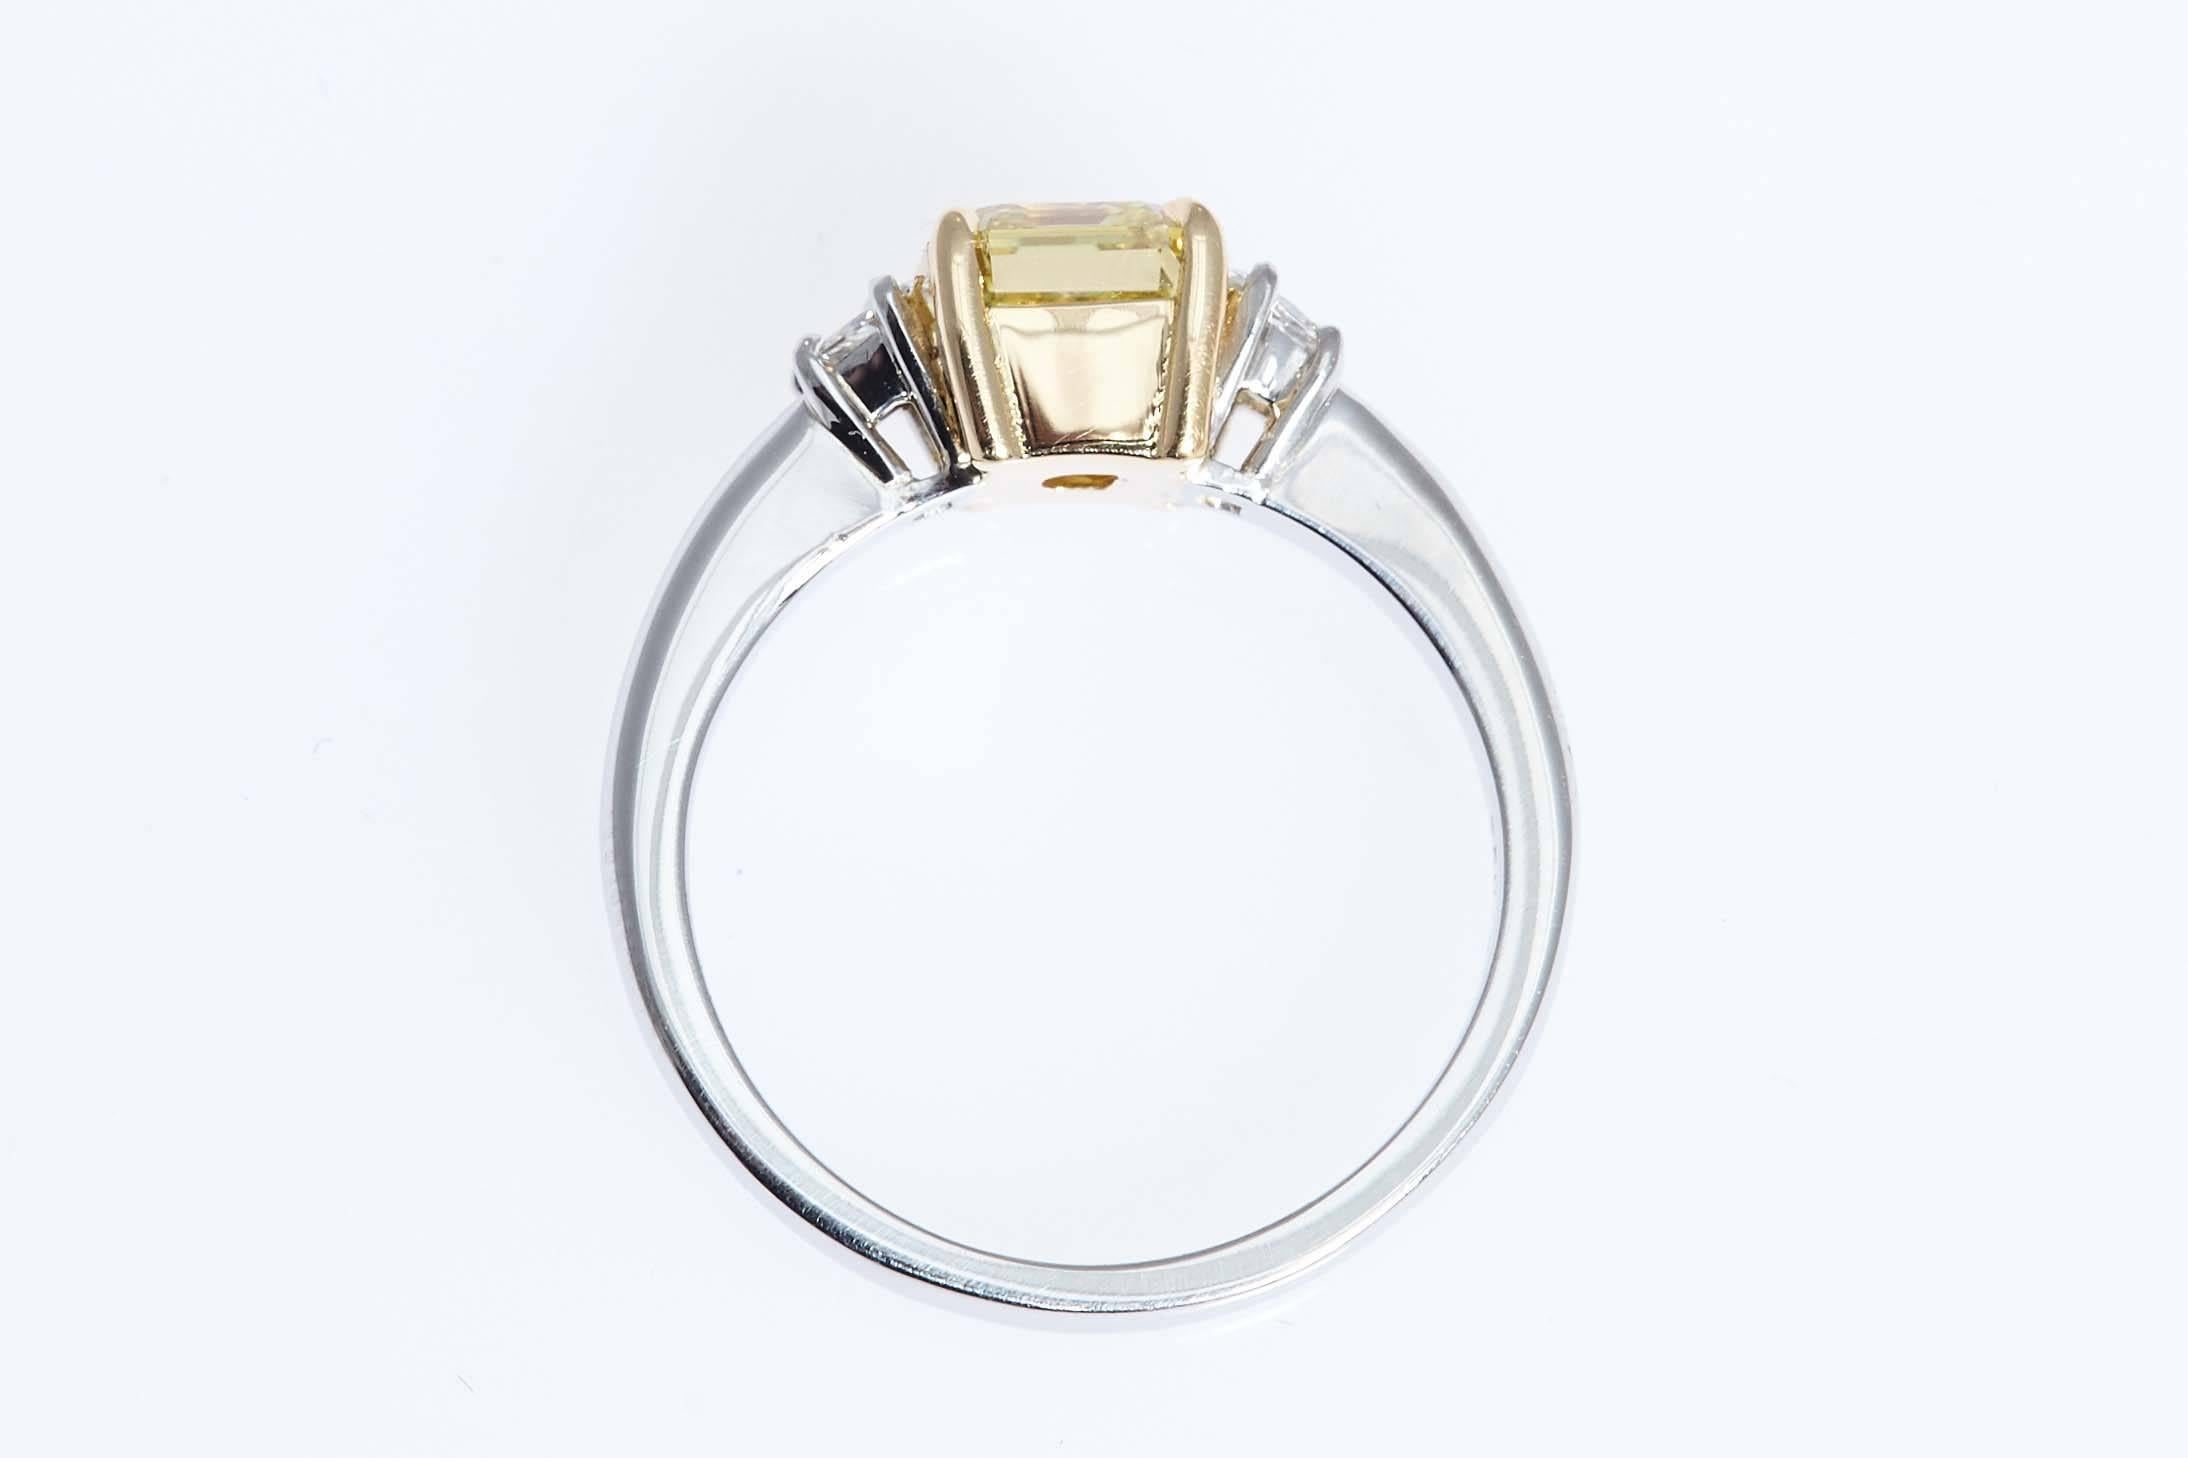 GIA Intense Yellow 1.62 Carat Emerald Cut Diamond Platinum Three-Stone Ring In Excellent Condition For Sale In New York, NY